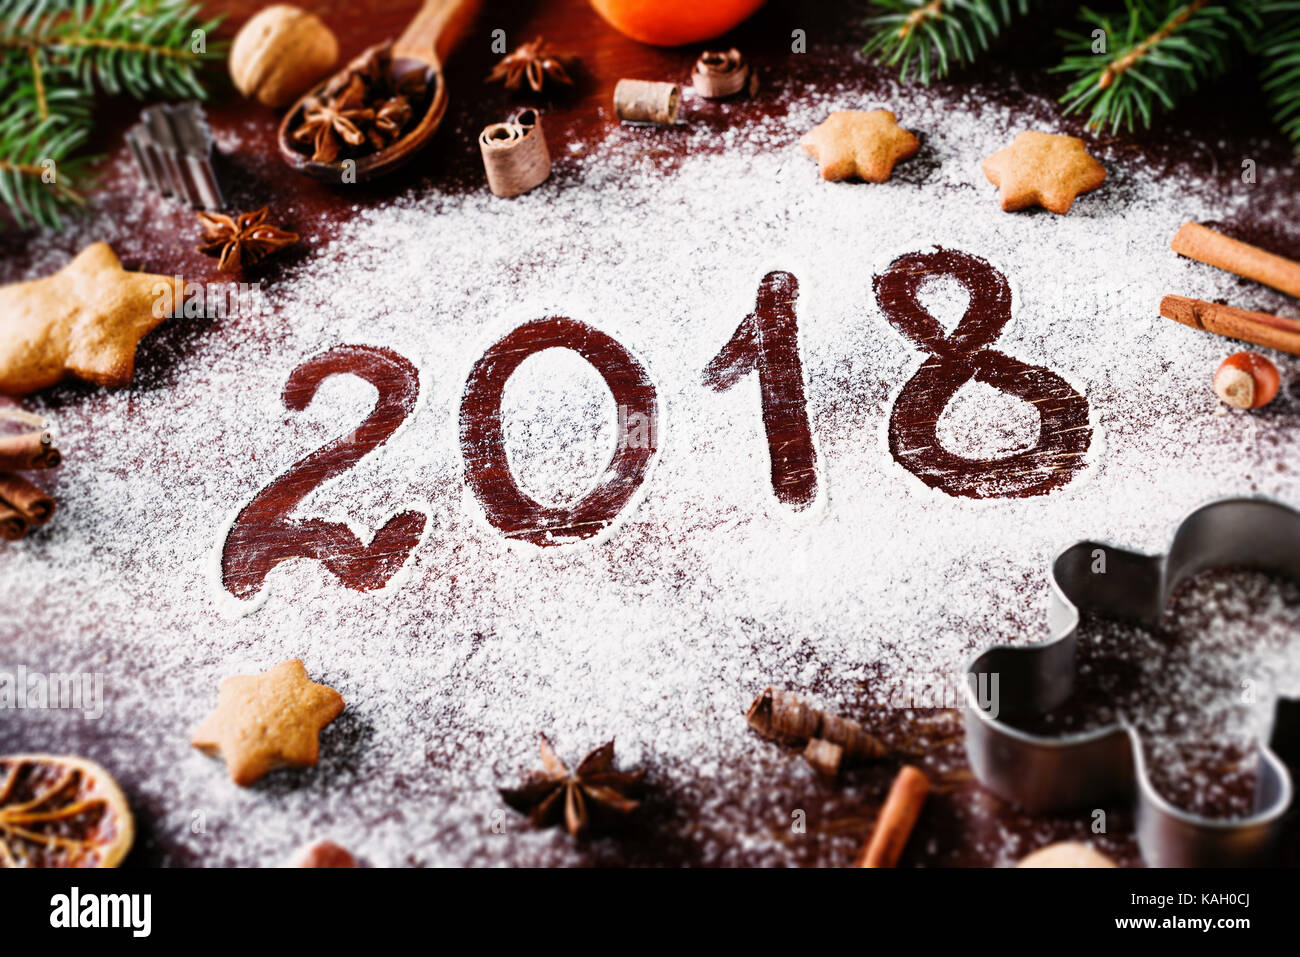 Happy New Year 2018 written on flour and Christmas Decorations Gingerbread cookies, cinnamin, oranges, spices, nuts and cookie cutters on wooden backg Stock Photo